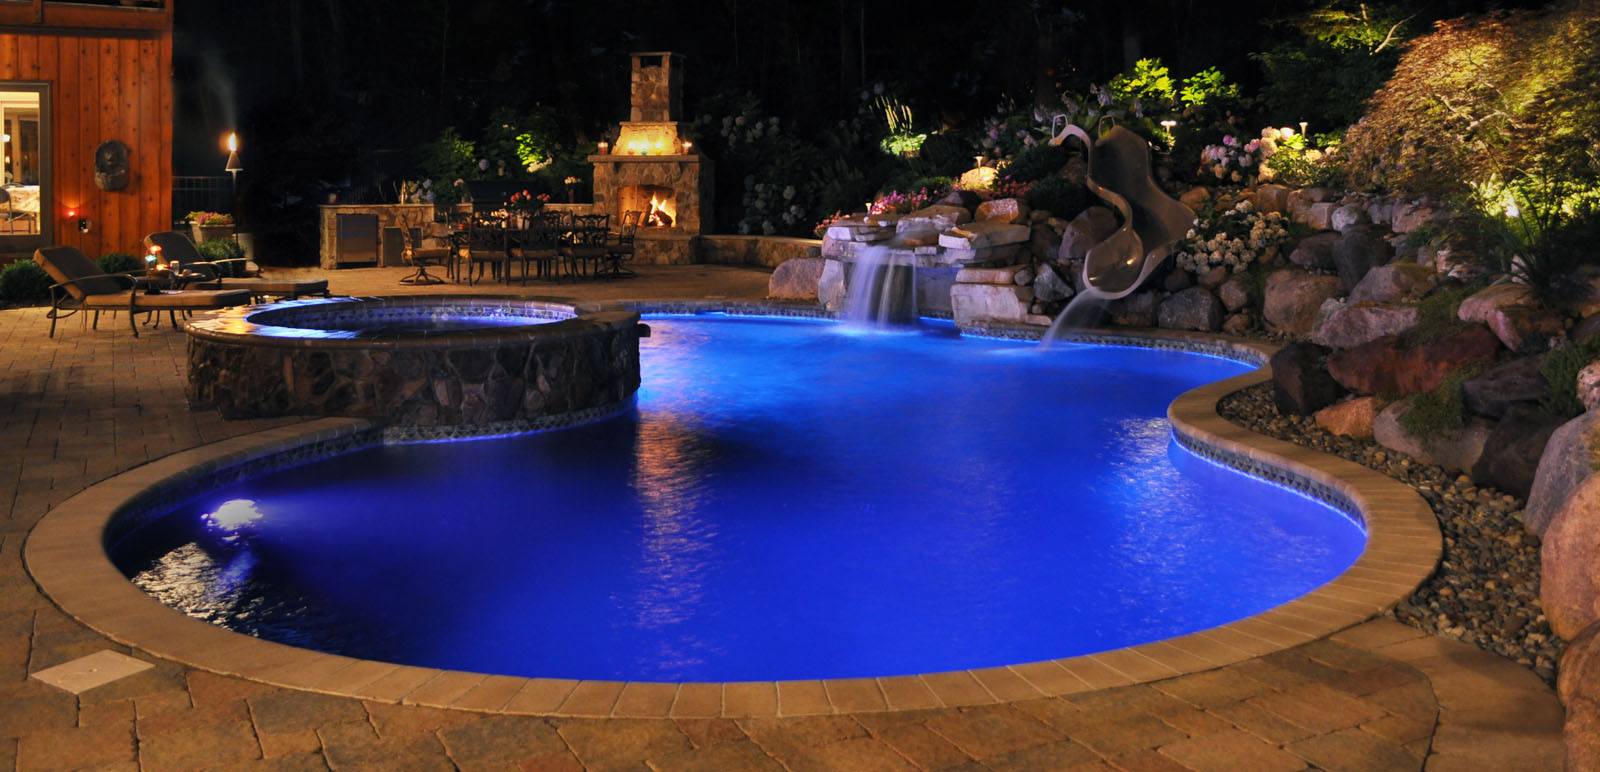 landscape lighting with uplighting and pool lights